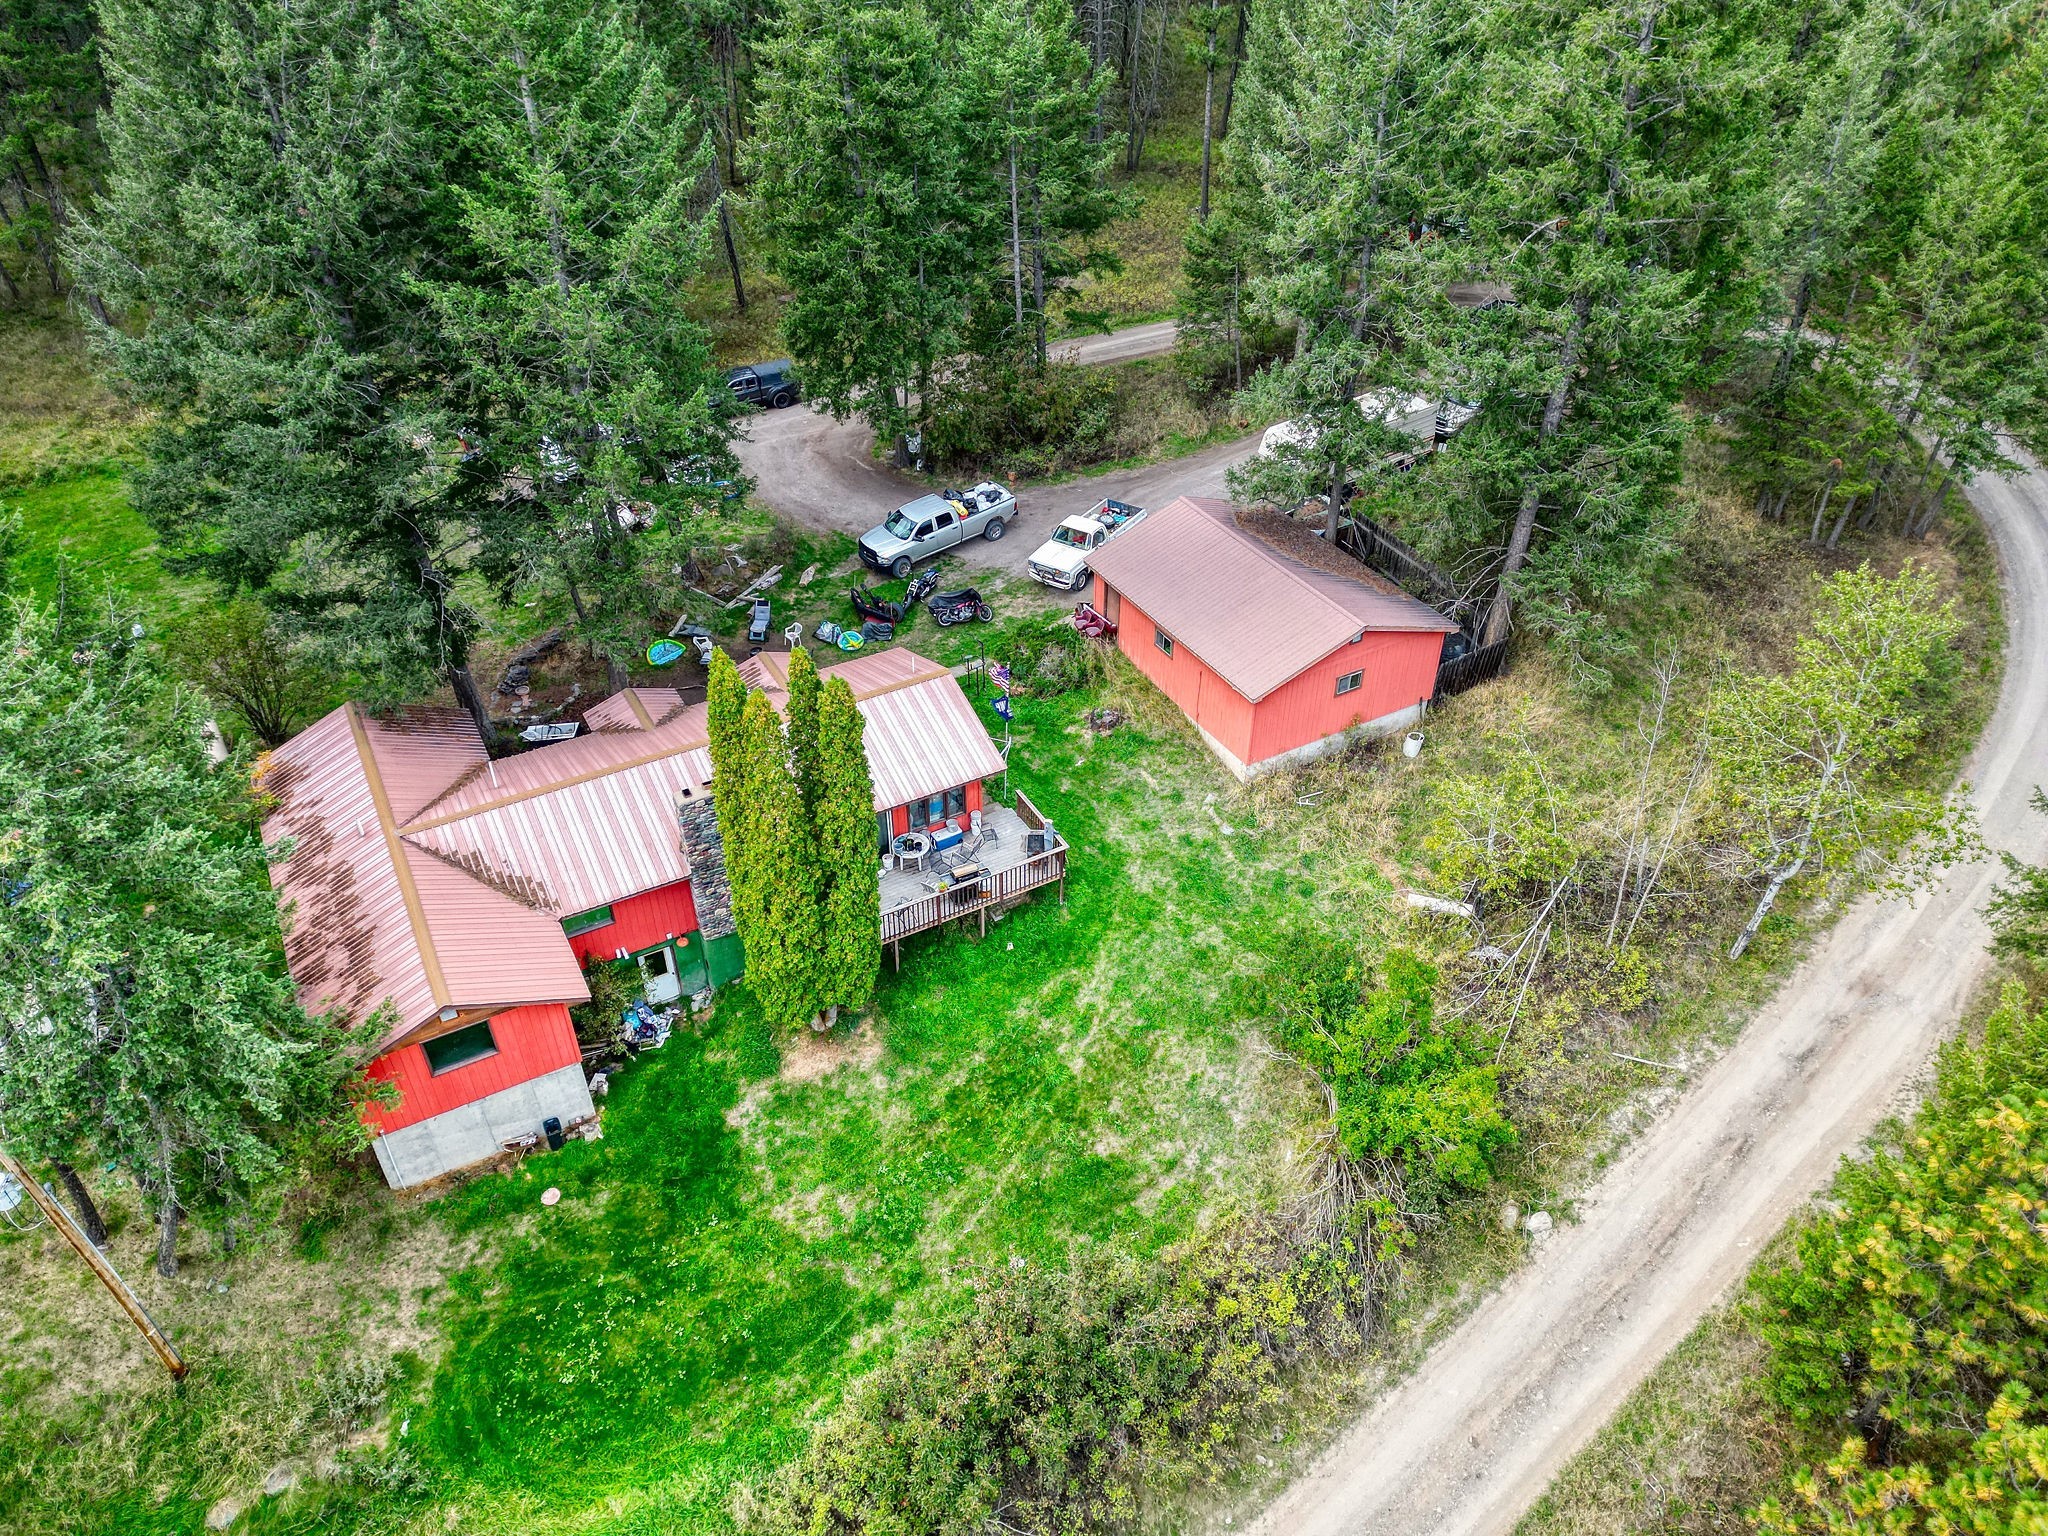 This remarkable 14.5-acre parcel offers an unparalleled opportunity for a slice of paradise close to downtown Bigfork, with no restrictive covenants or HOA and INVESTOR building potential. With access right off Highway 35, you have a short drive to Flathead Lake, Whitefish Ski Resort, Glacier Park & G.N. Airport! On the upper bench of the property sits a fixer-upper 3 bed, 2 bath home and garage with its own private well and permitted septic. This property will be sold as-is, needs TLC, but provides impeccable Swan Mountain views. Contact Amanda Kelly at 406-407-3989, or your real estate professional, for more information. Showings by Appointment Only!